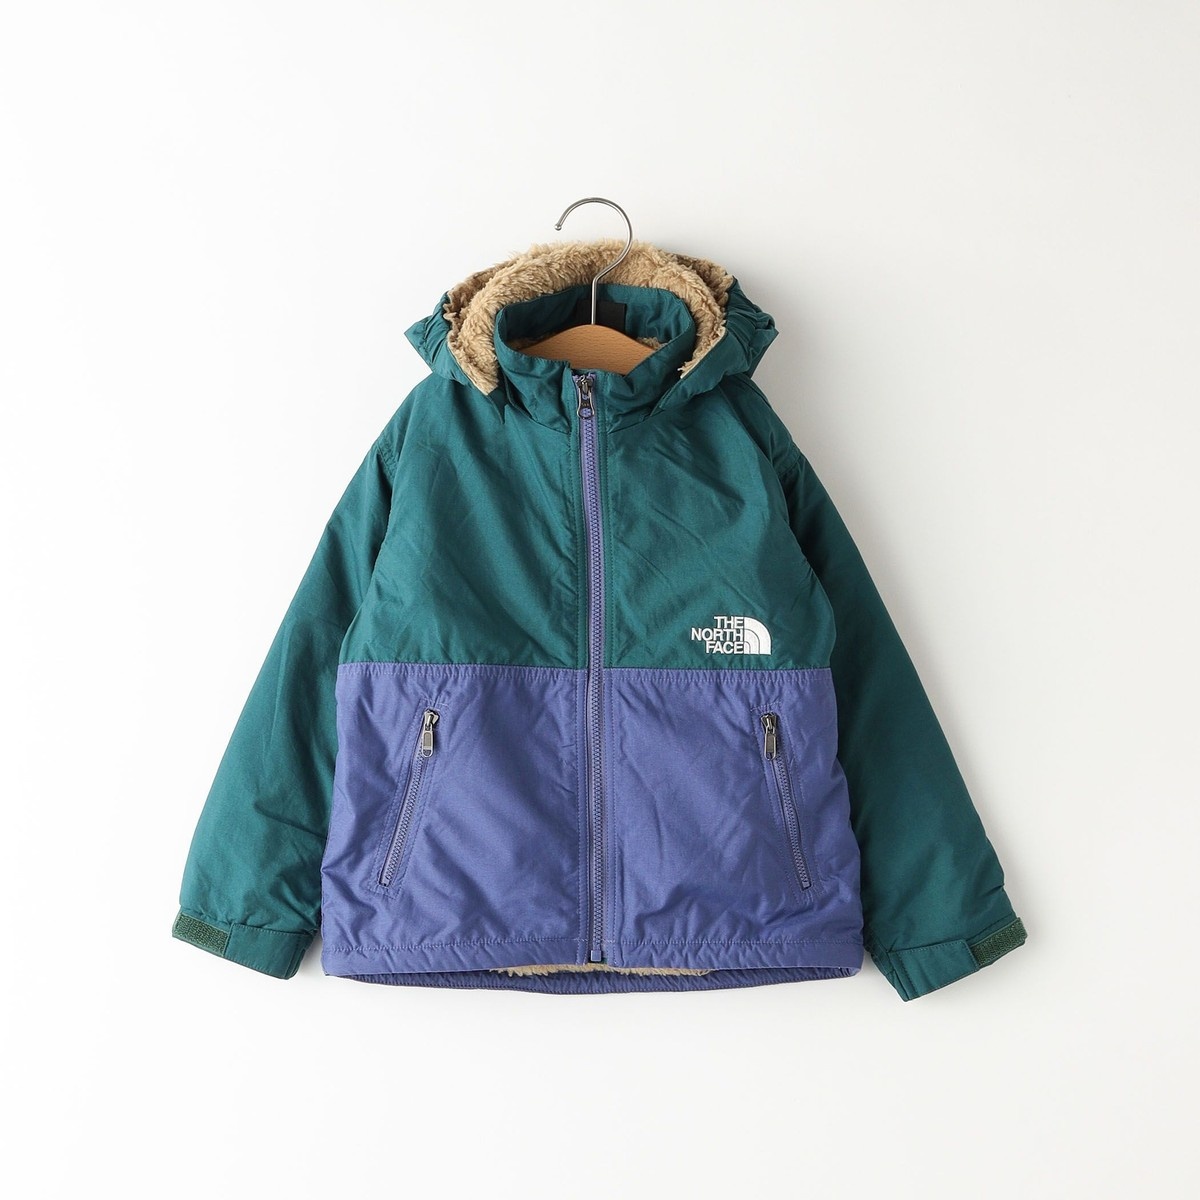 THE NORTH FACE:100～150cm / Compact Nomad Jacket | シップス(SHIPS